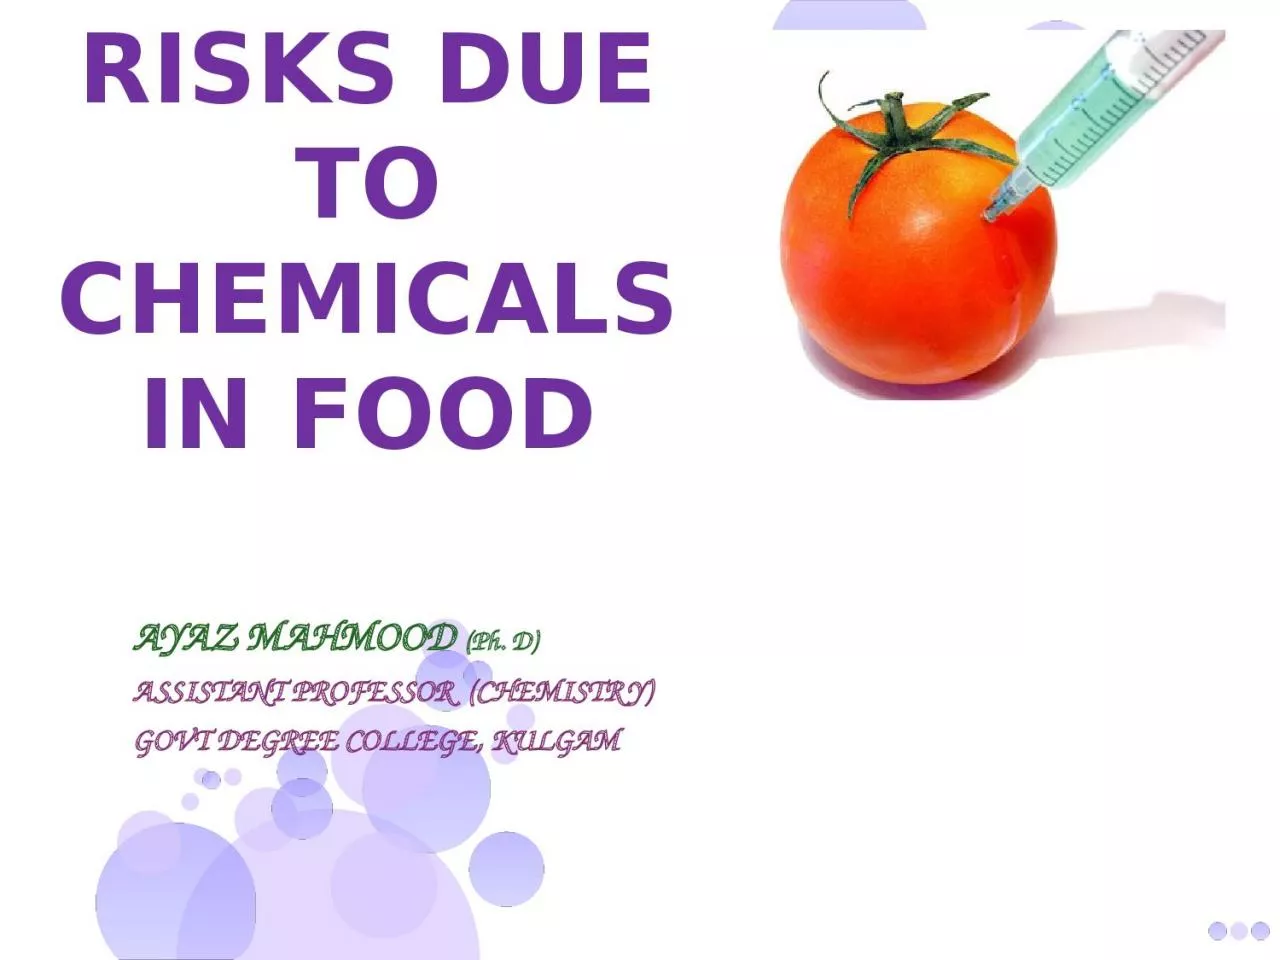 RISKS DUE TO CHEMICALS IN FOOD